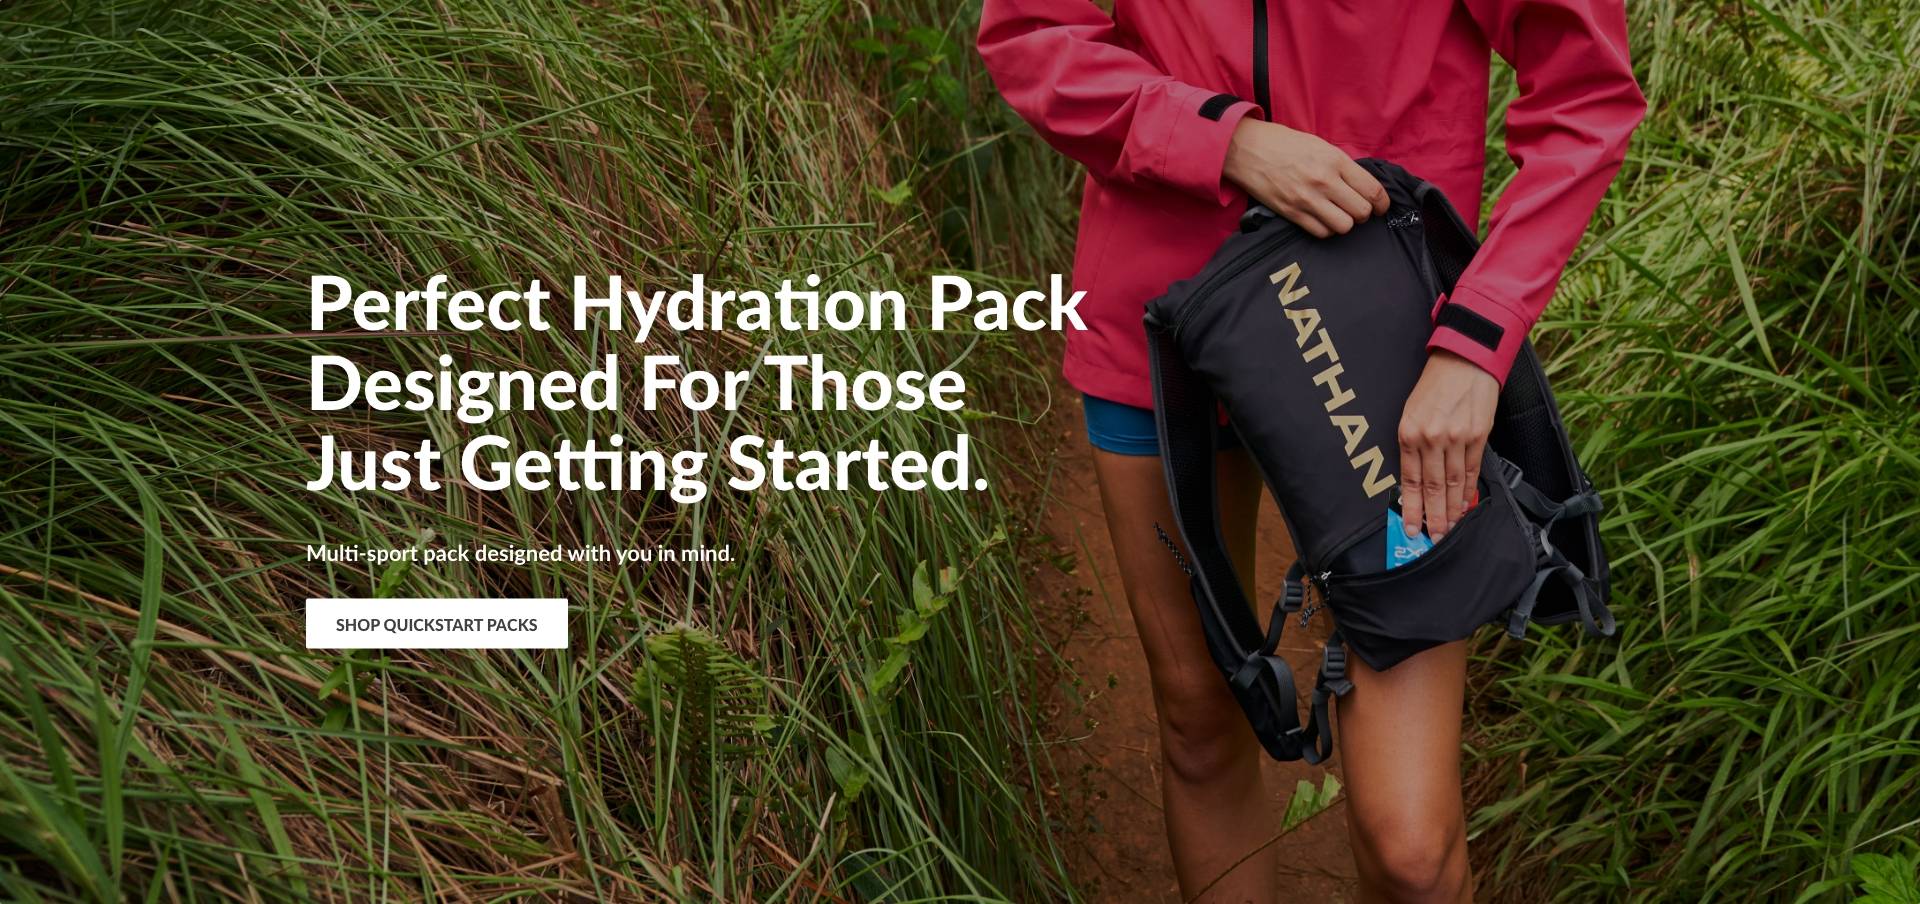 Perfect Hydration Pack Designed For Those Just Getting Started. Multi-sport pack designed with you in mind SHOP QUICKSTART PACKS